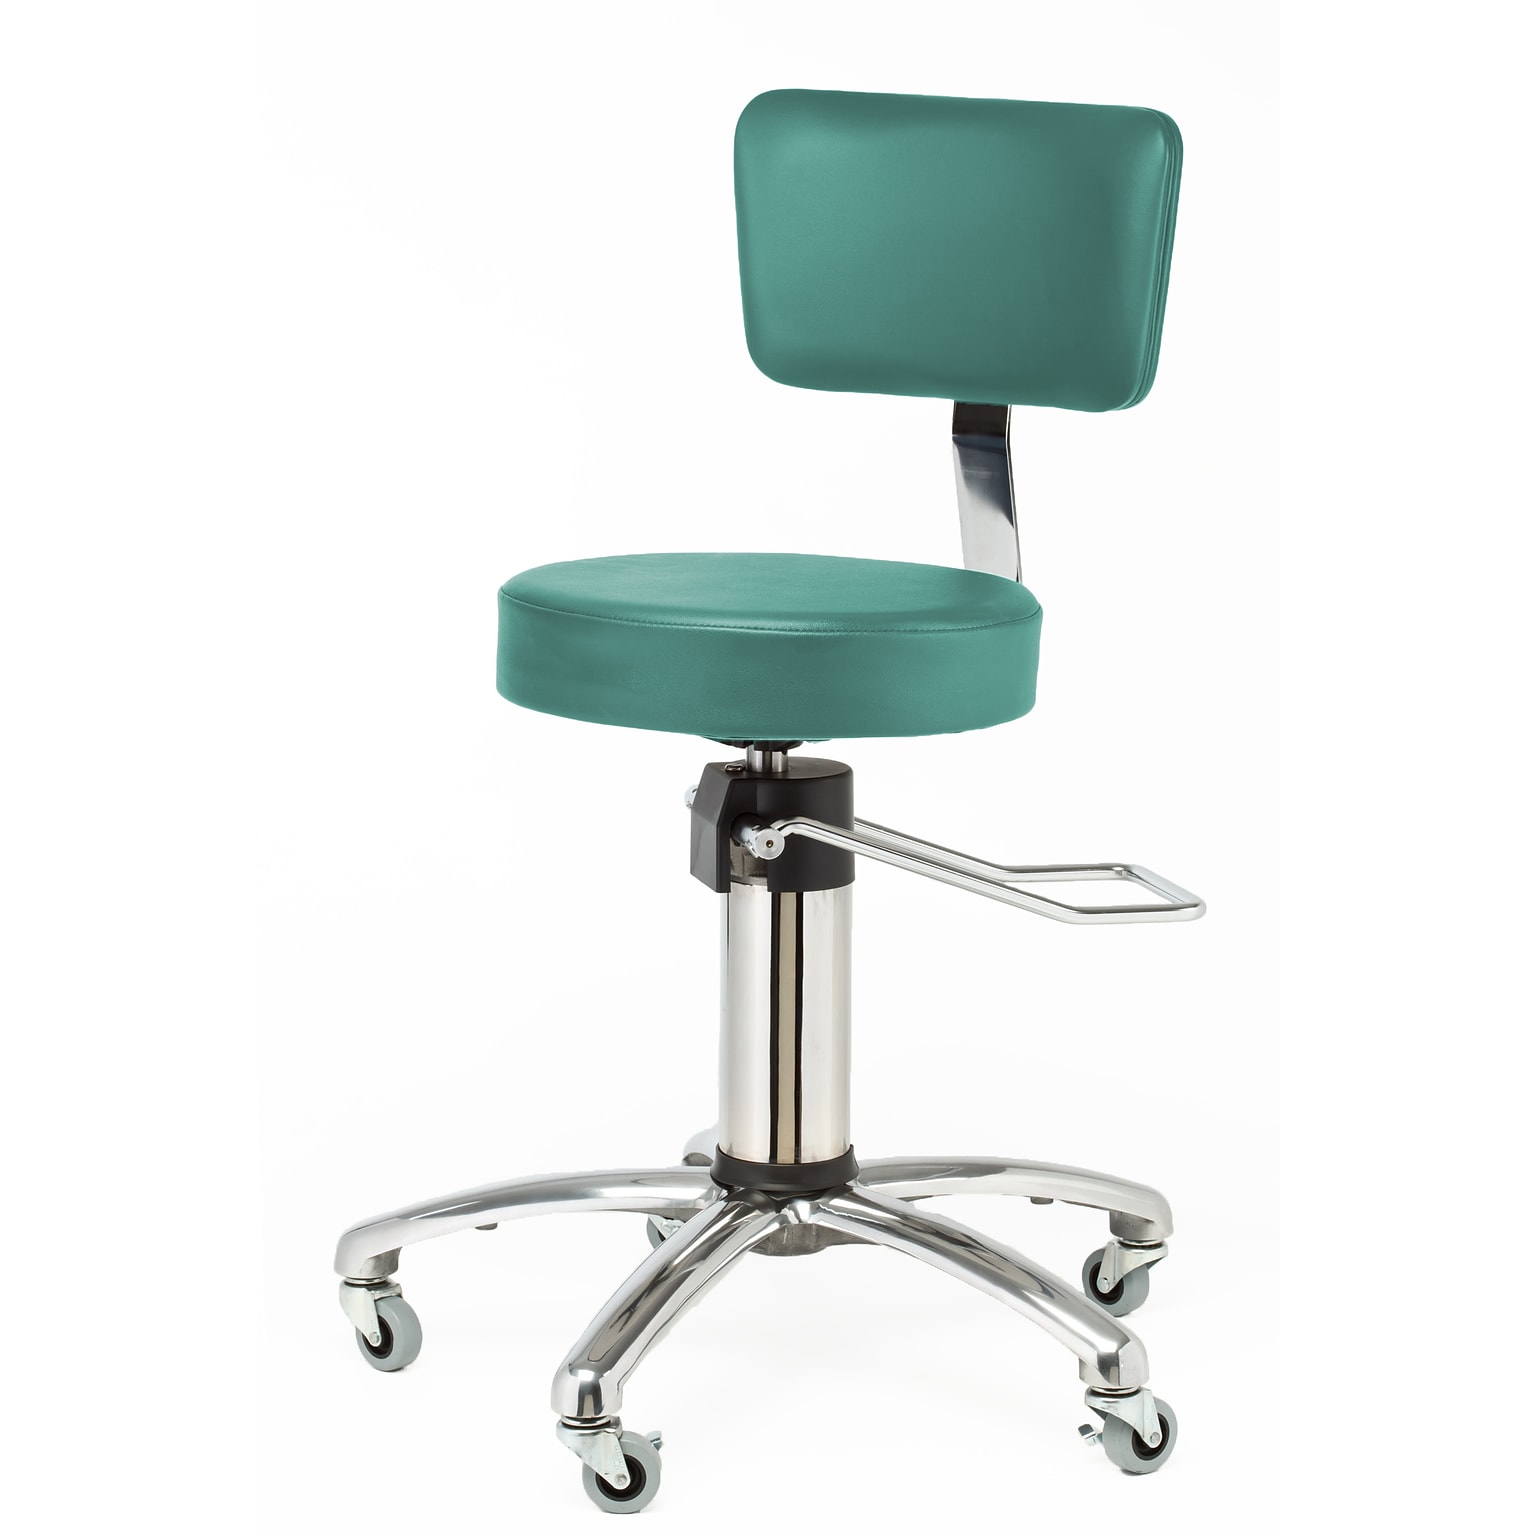 Brandt Hydraulic Surgeon Stool with Backrest with Backrest, Teal (15512TEAL)